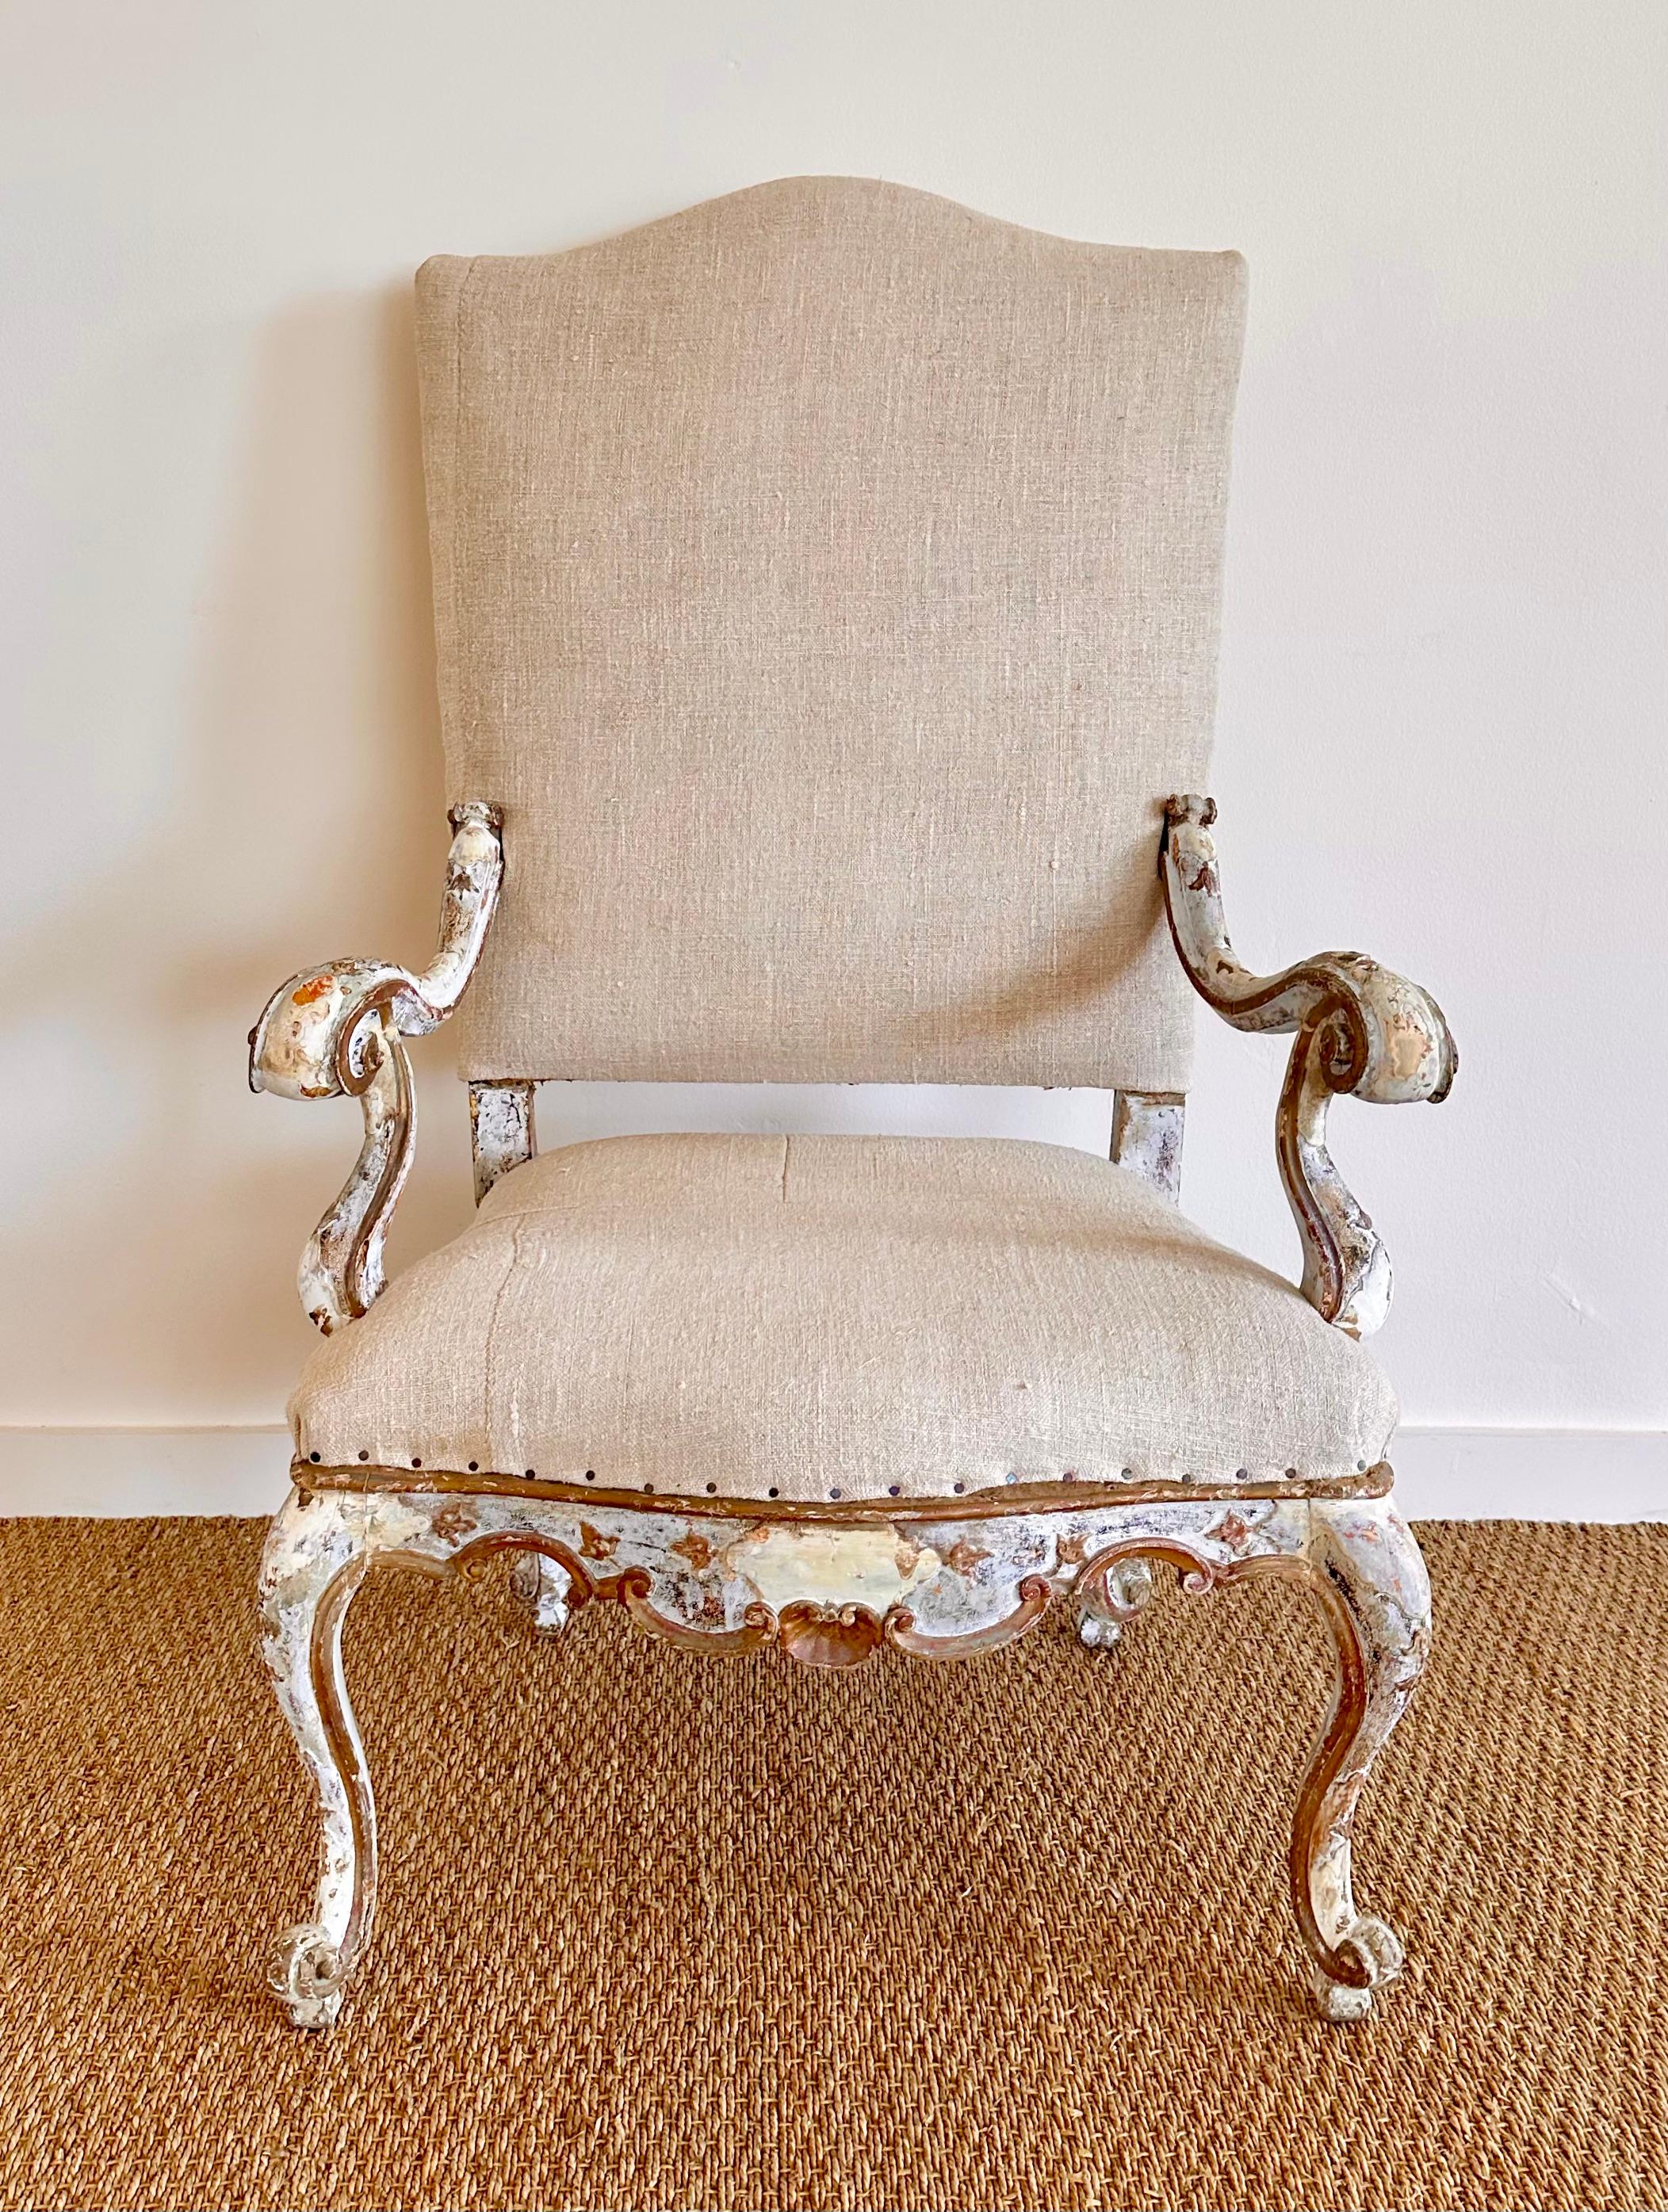 18th C. Tall Italian Armchair with white, pale blue-grey paint , and with gilt detailing.  Original Finish.  
Extremely charming and highly decorative as well as comfortable.  recently upholstered in heavy Belgian linen fabric.  